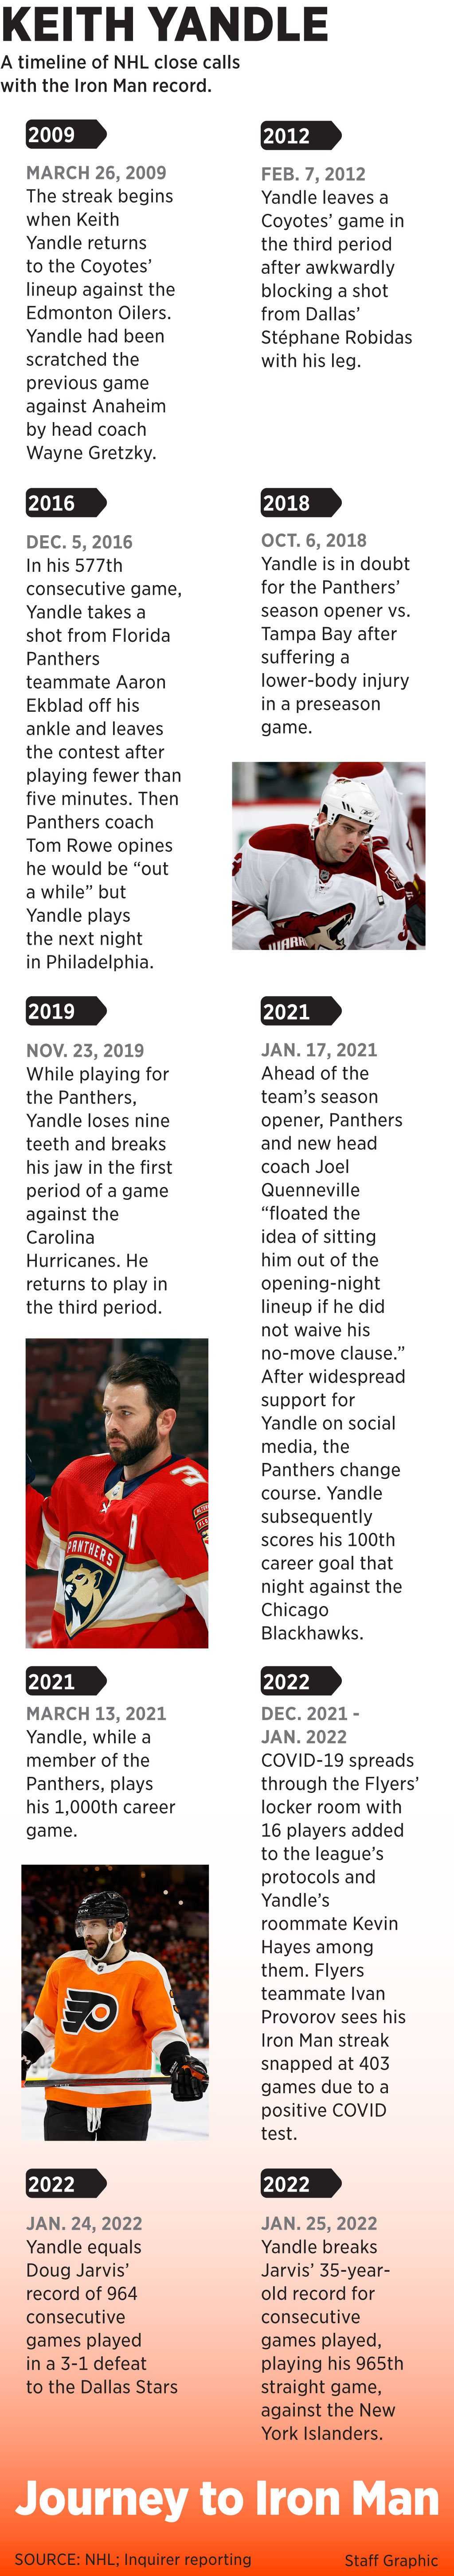 Panthers' Keith Yandle scratched for first time since 2009